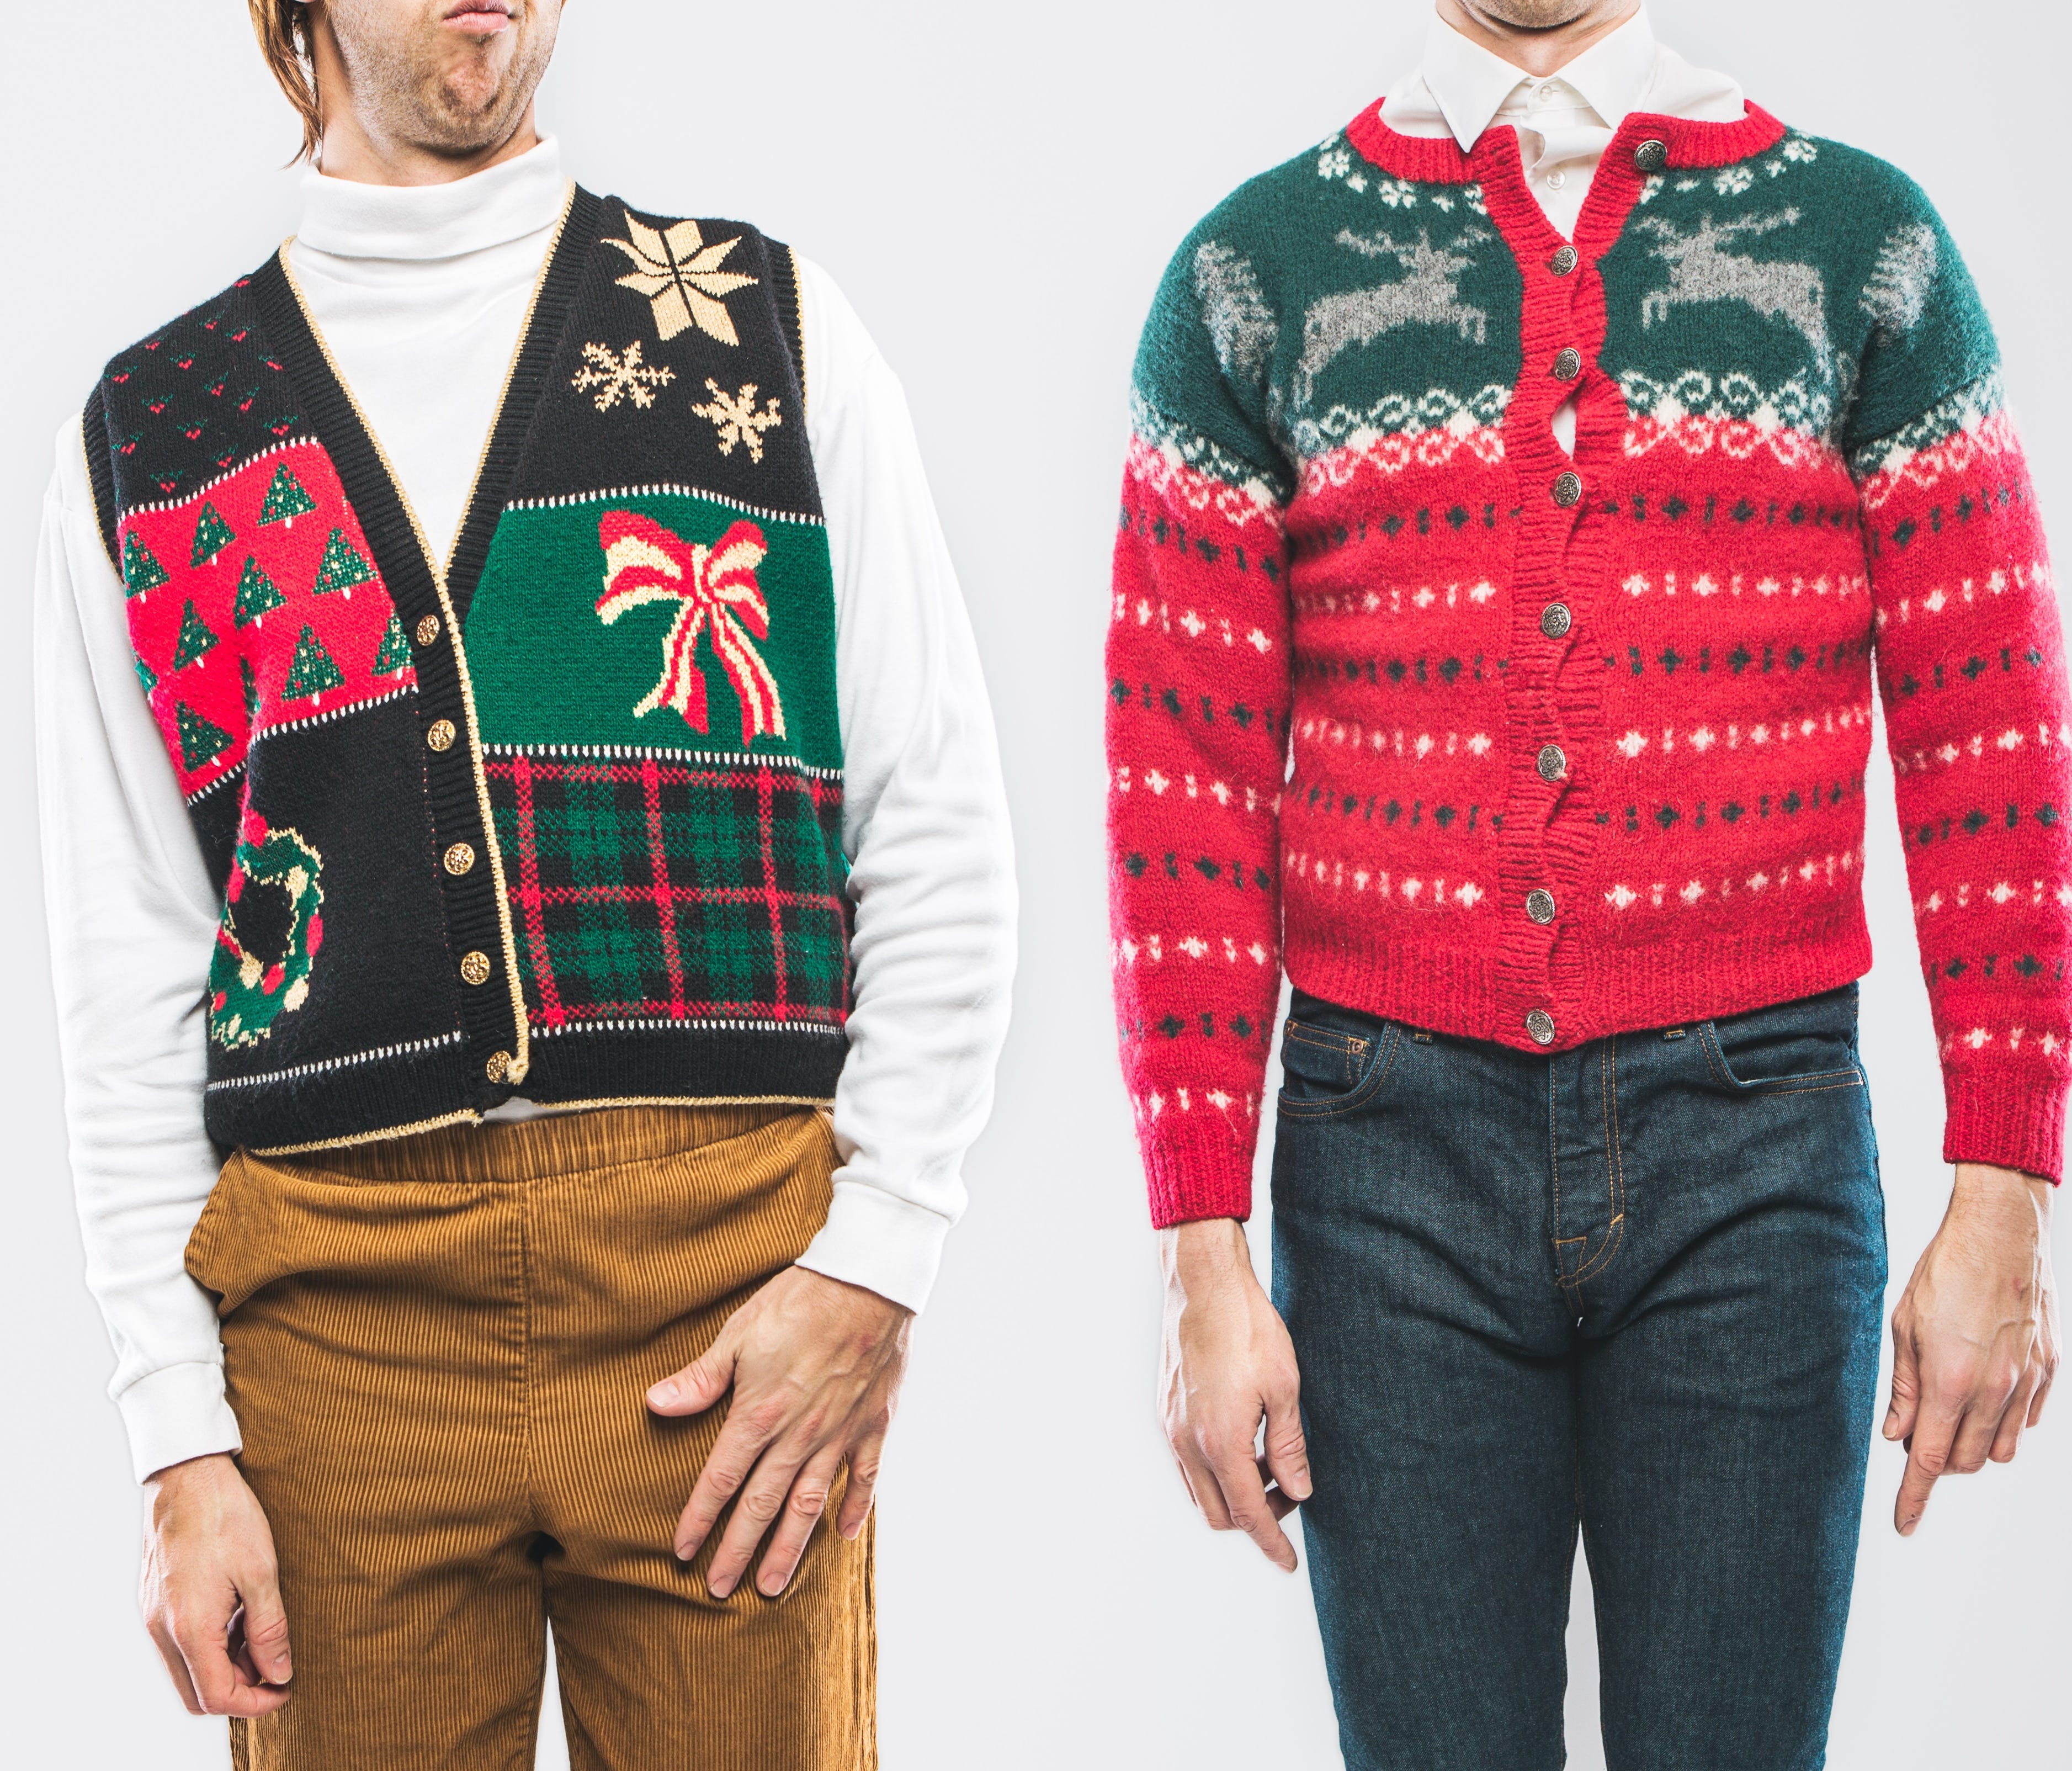 People wearing knit ugly Christmas sweaters and cardigans.